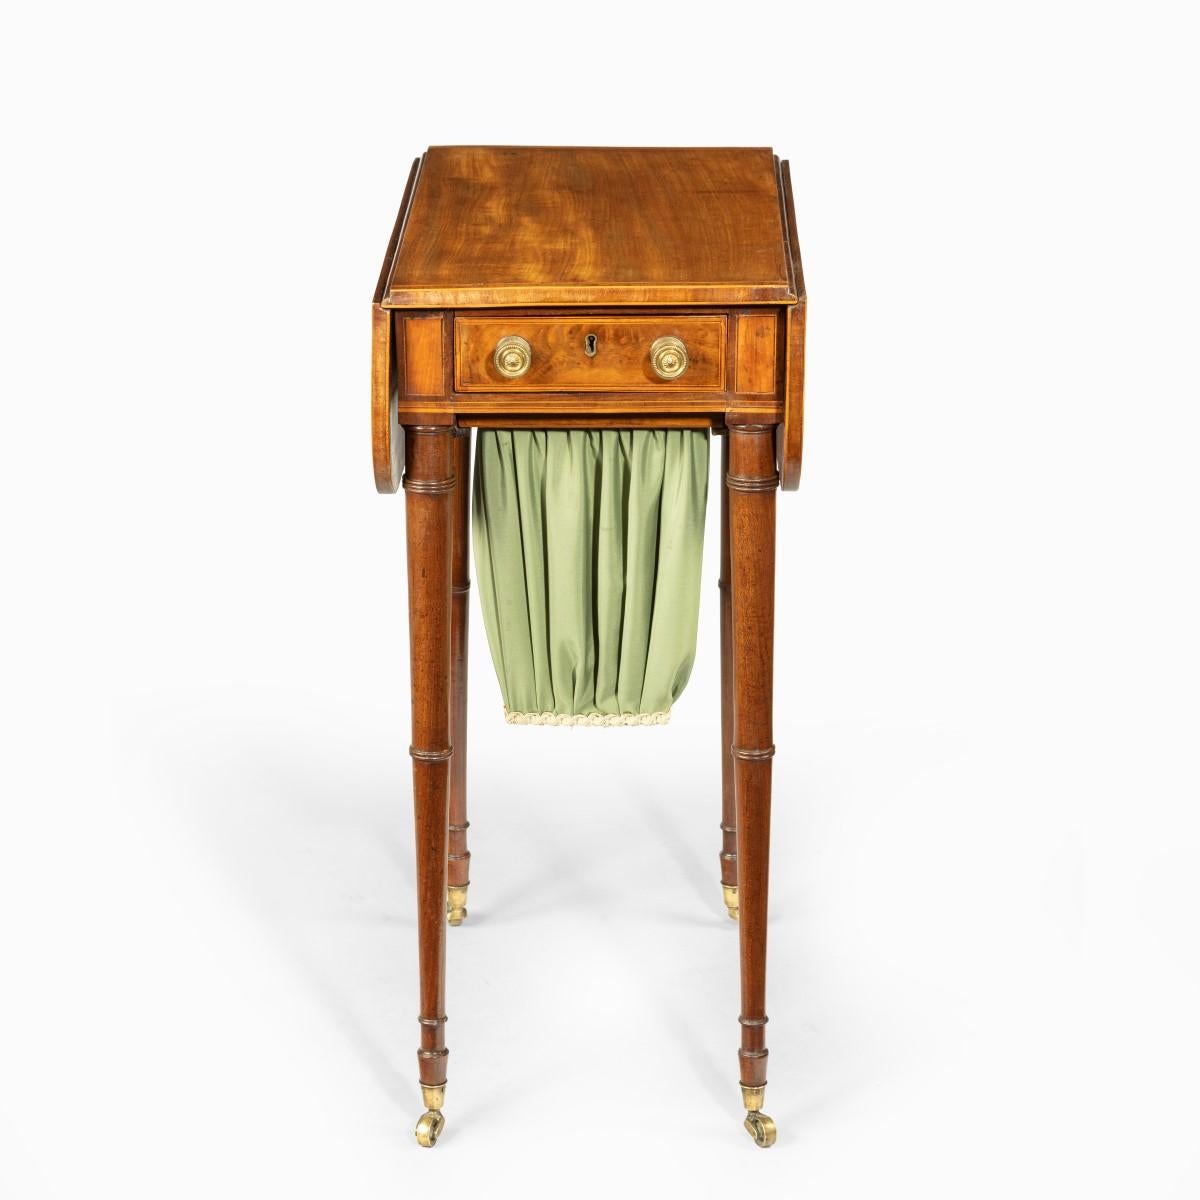 An elegant George III mahogany Pembroke sewing table, of typical form with two shaped flaps on either side of a central drawer and pleated silk work bag on a slide, the fine turned, tapering legs on the original castors, with kingwood banding,